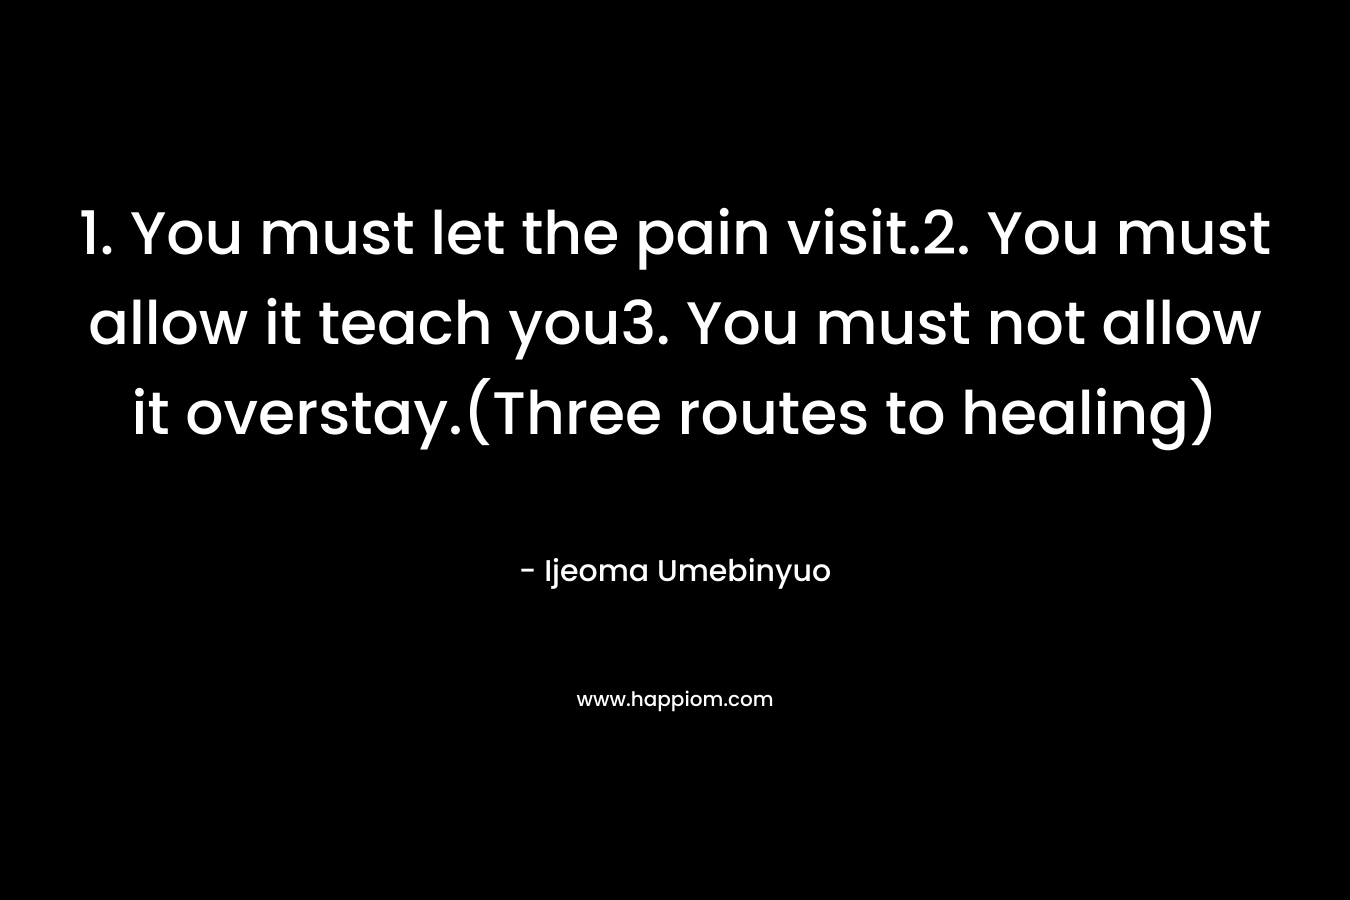 1. You must let the pain visit.2. You must allow it teach you3. You must not allow it overstay.(Three routes to healing)